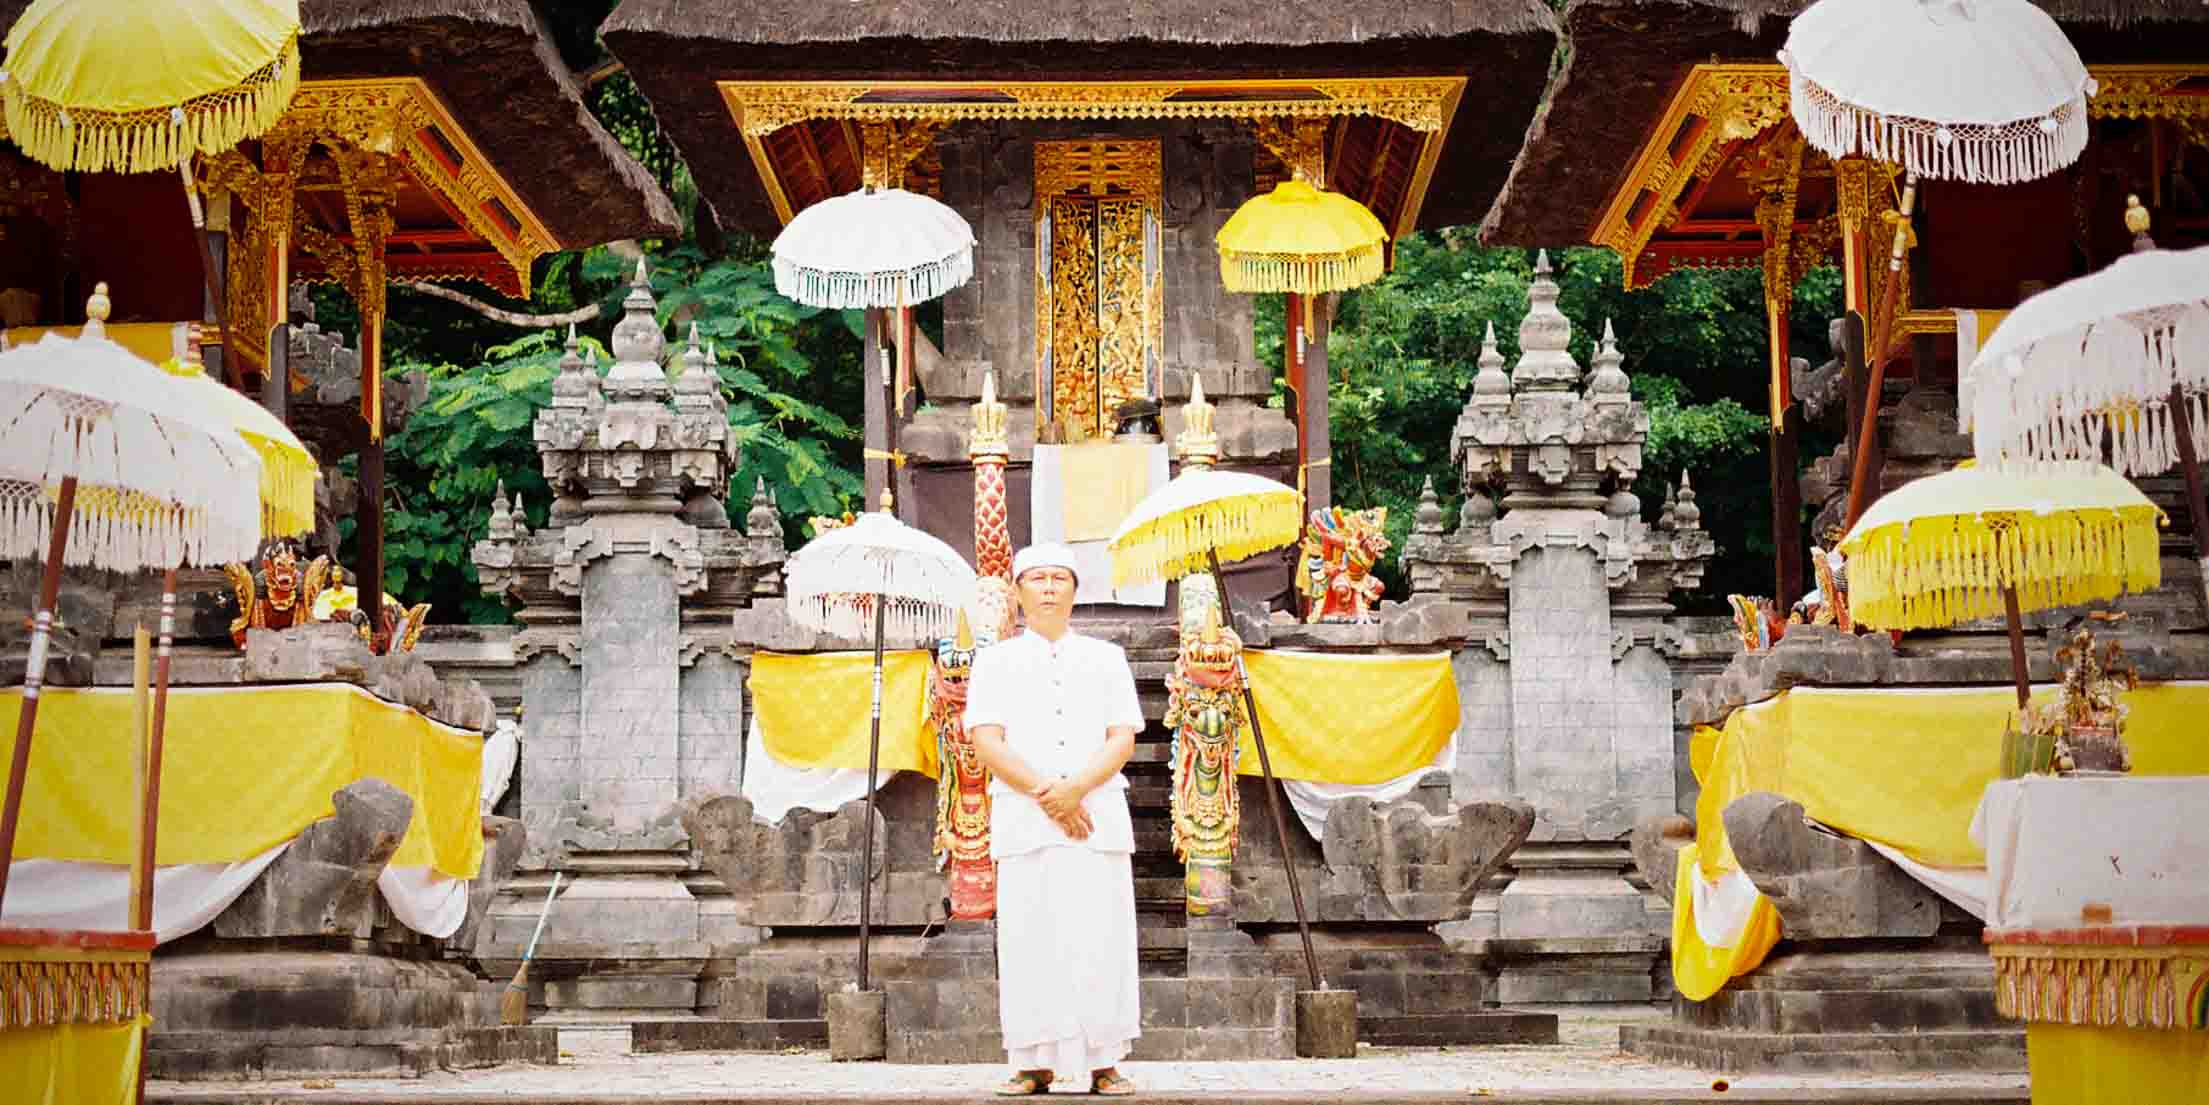 Mangku Dewa in North Bali in front of his village temple